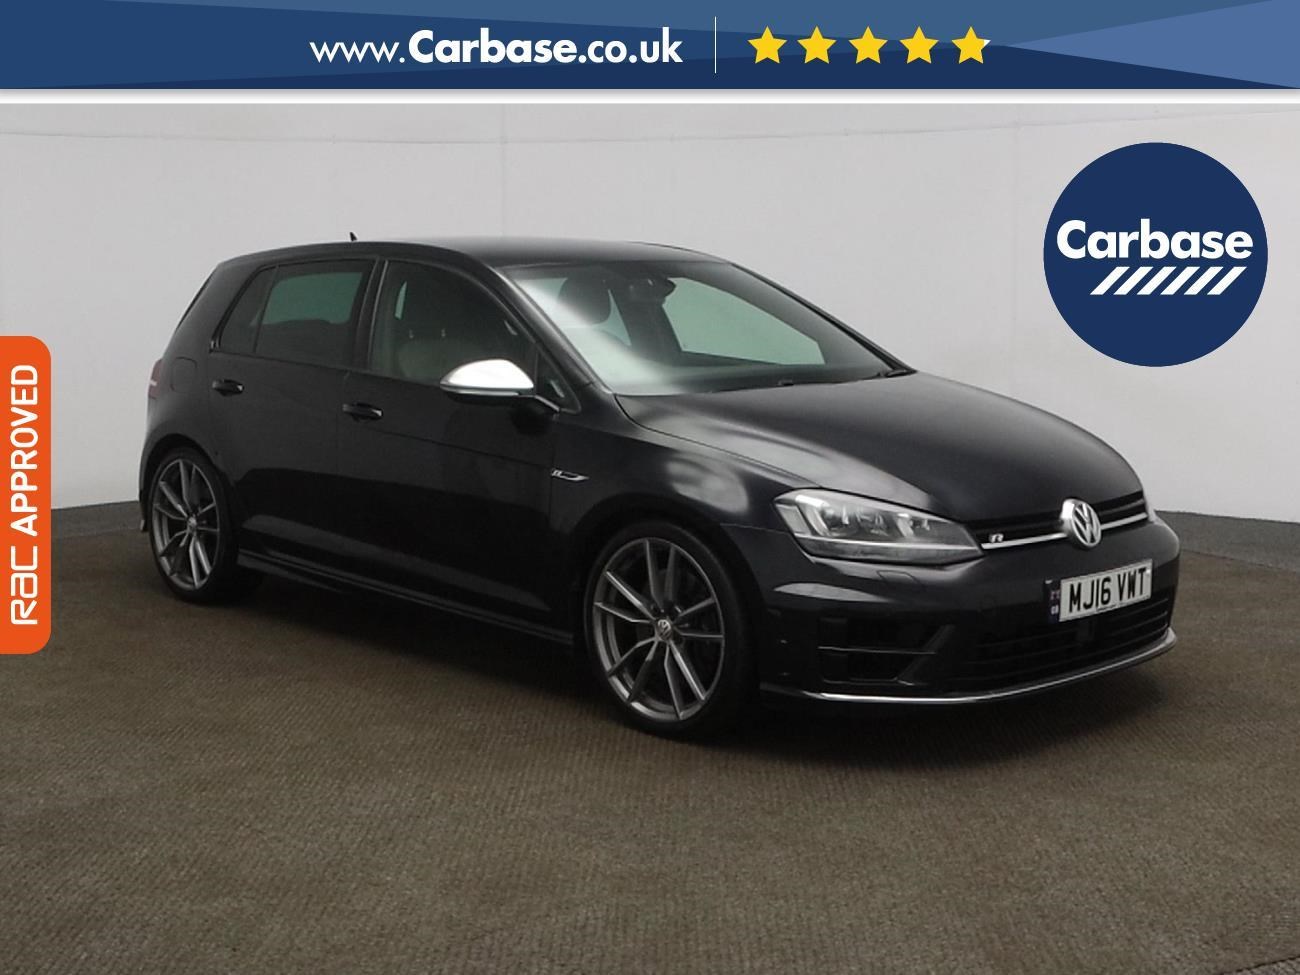 Used Volkswagen Cars for Sale Bristol, PCP Finance on Used VW Cars